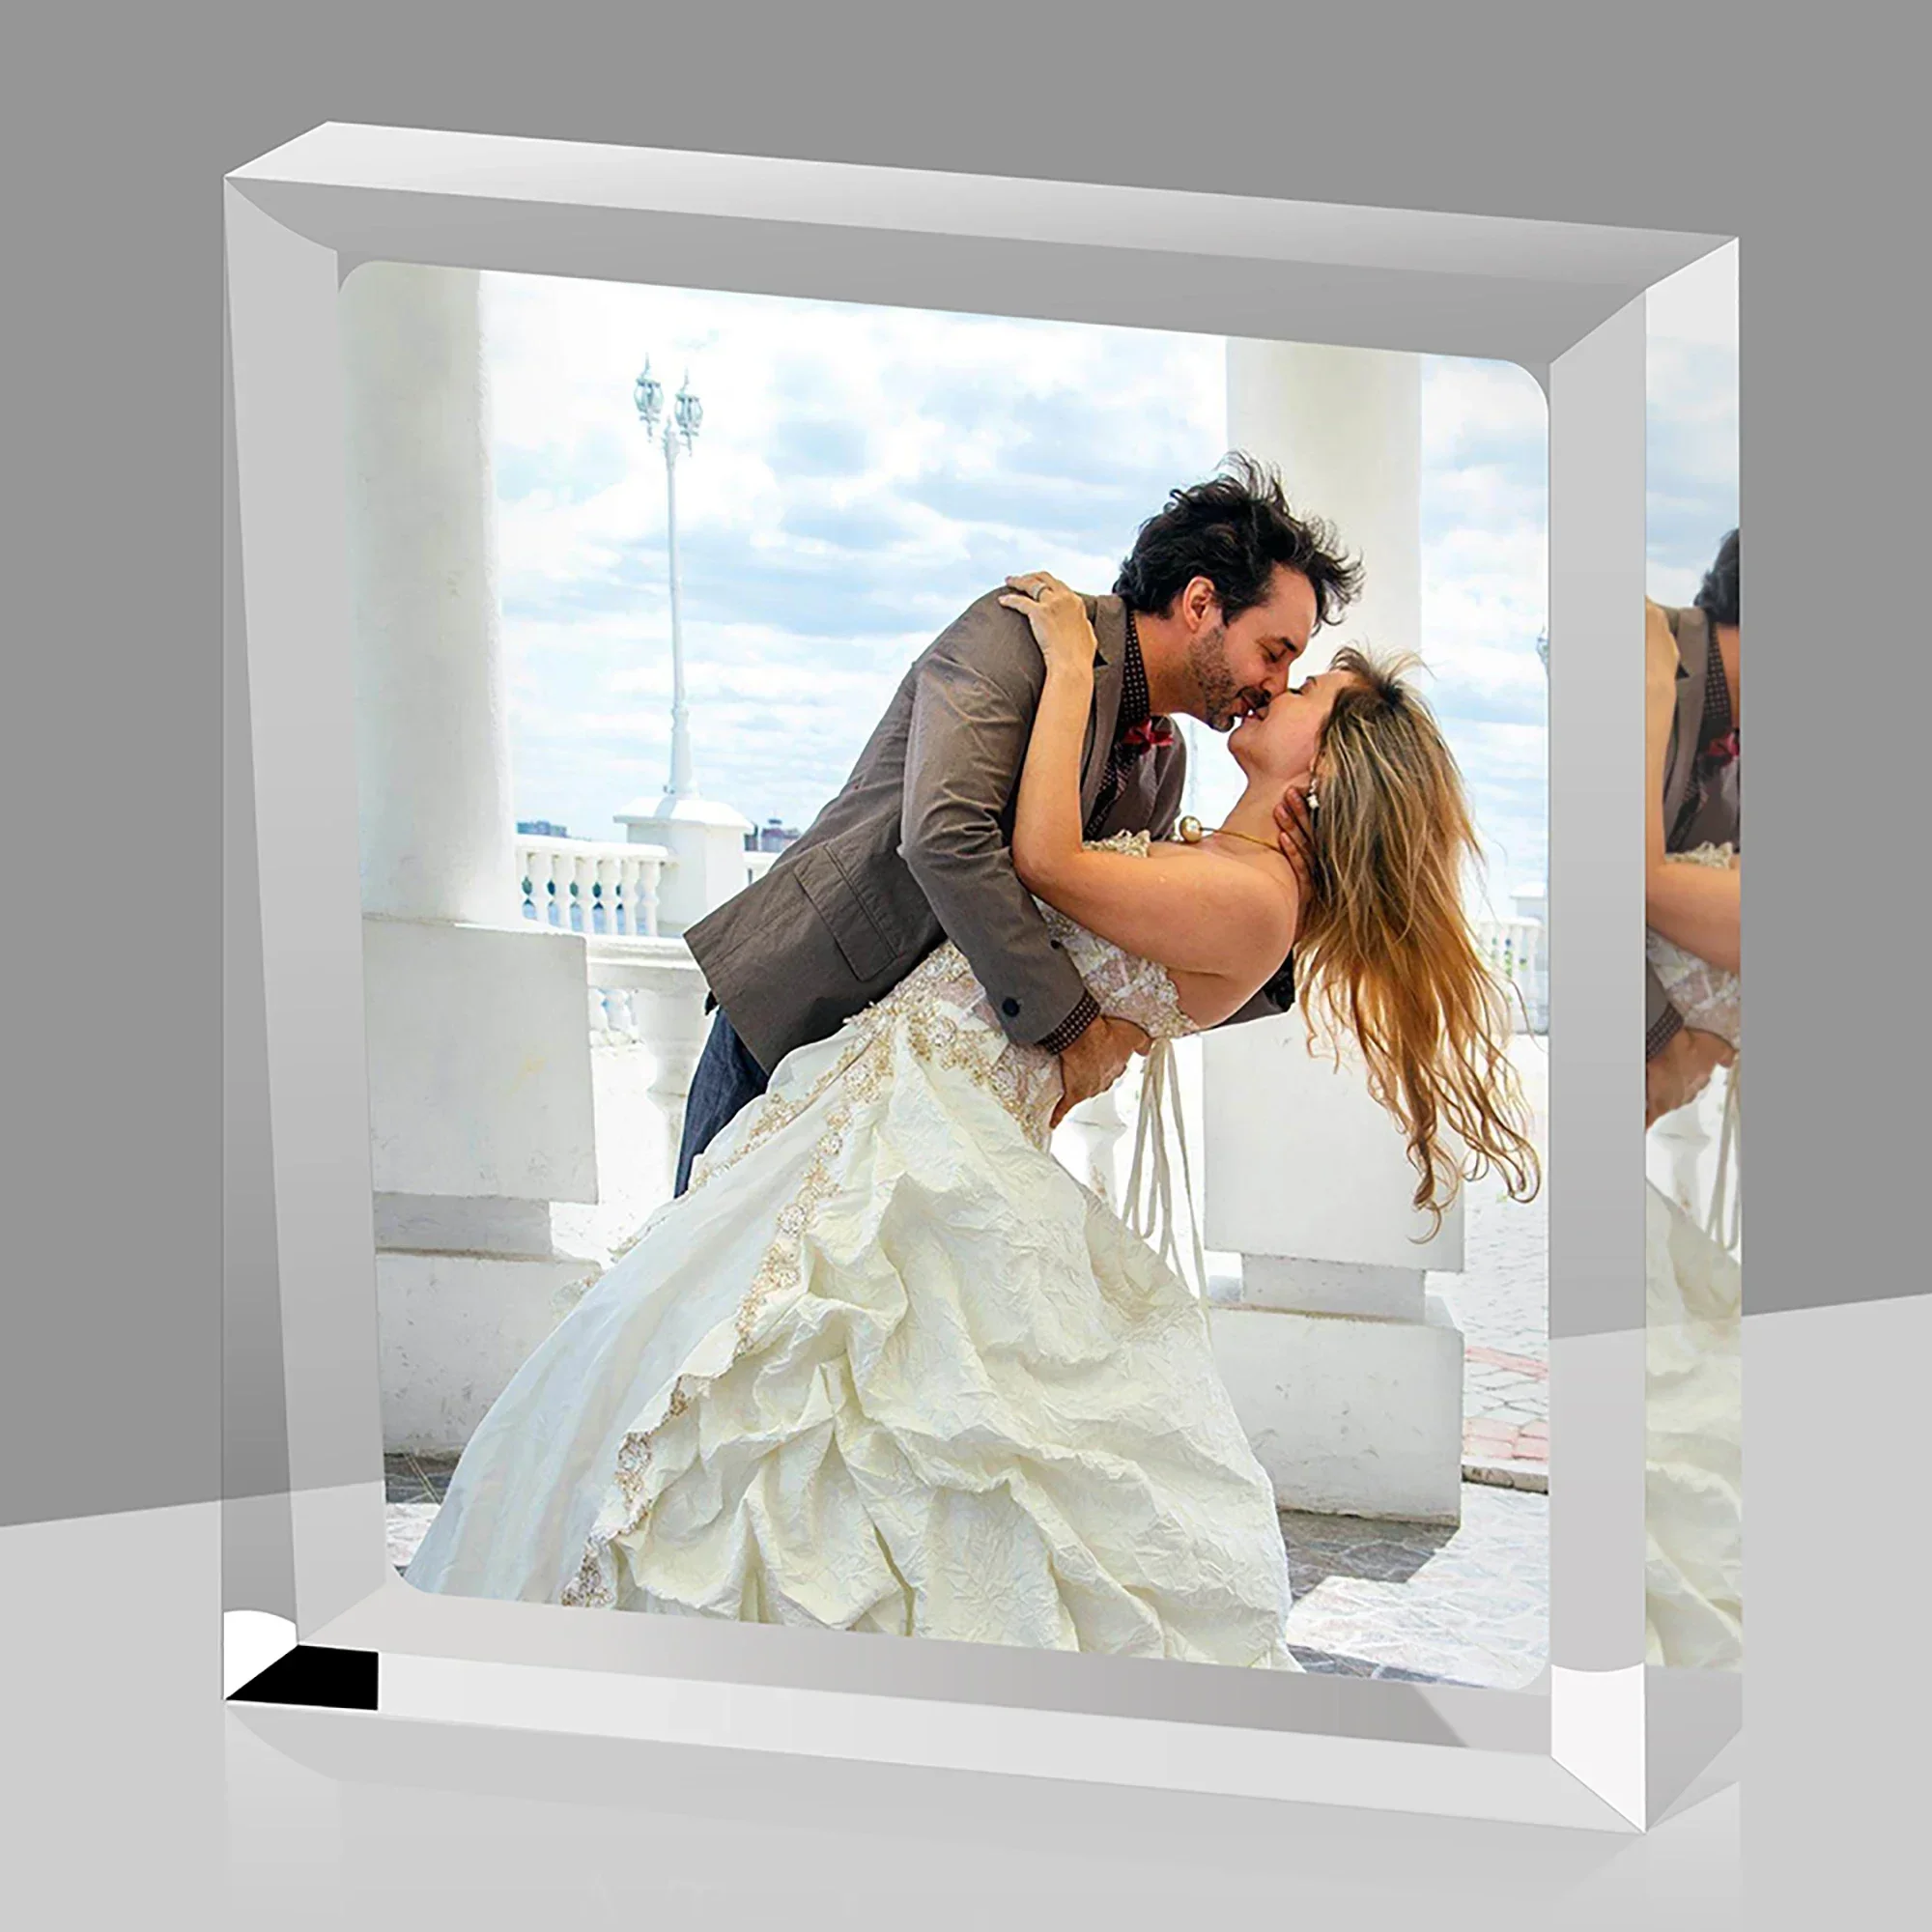 

Custom Photo Acrylic Plaque for Him Her Personalized Couples Keepsake Decor Christmas Wedding Anniversary Gift Decoration Sign